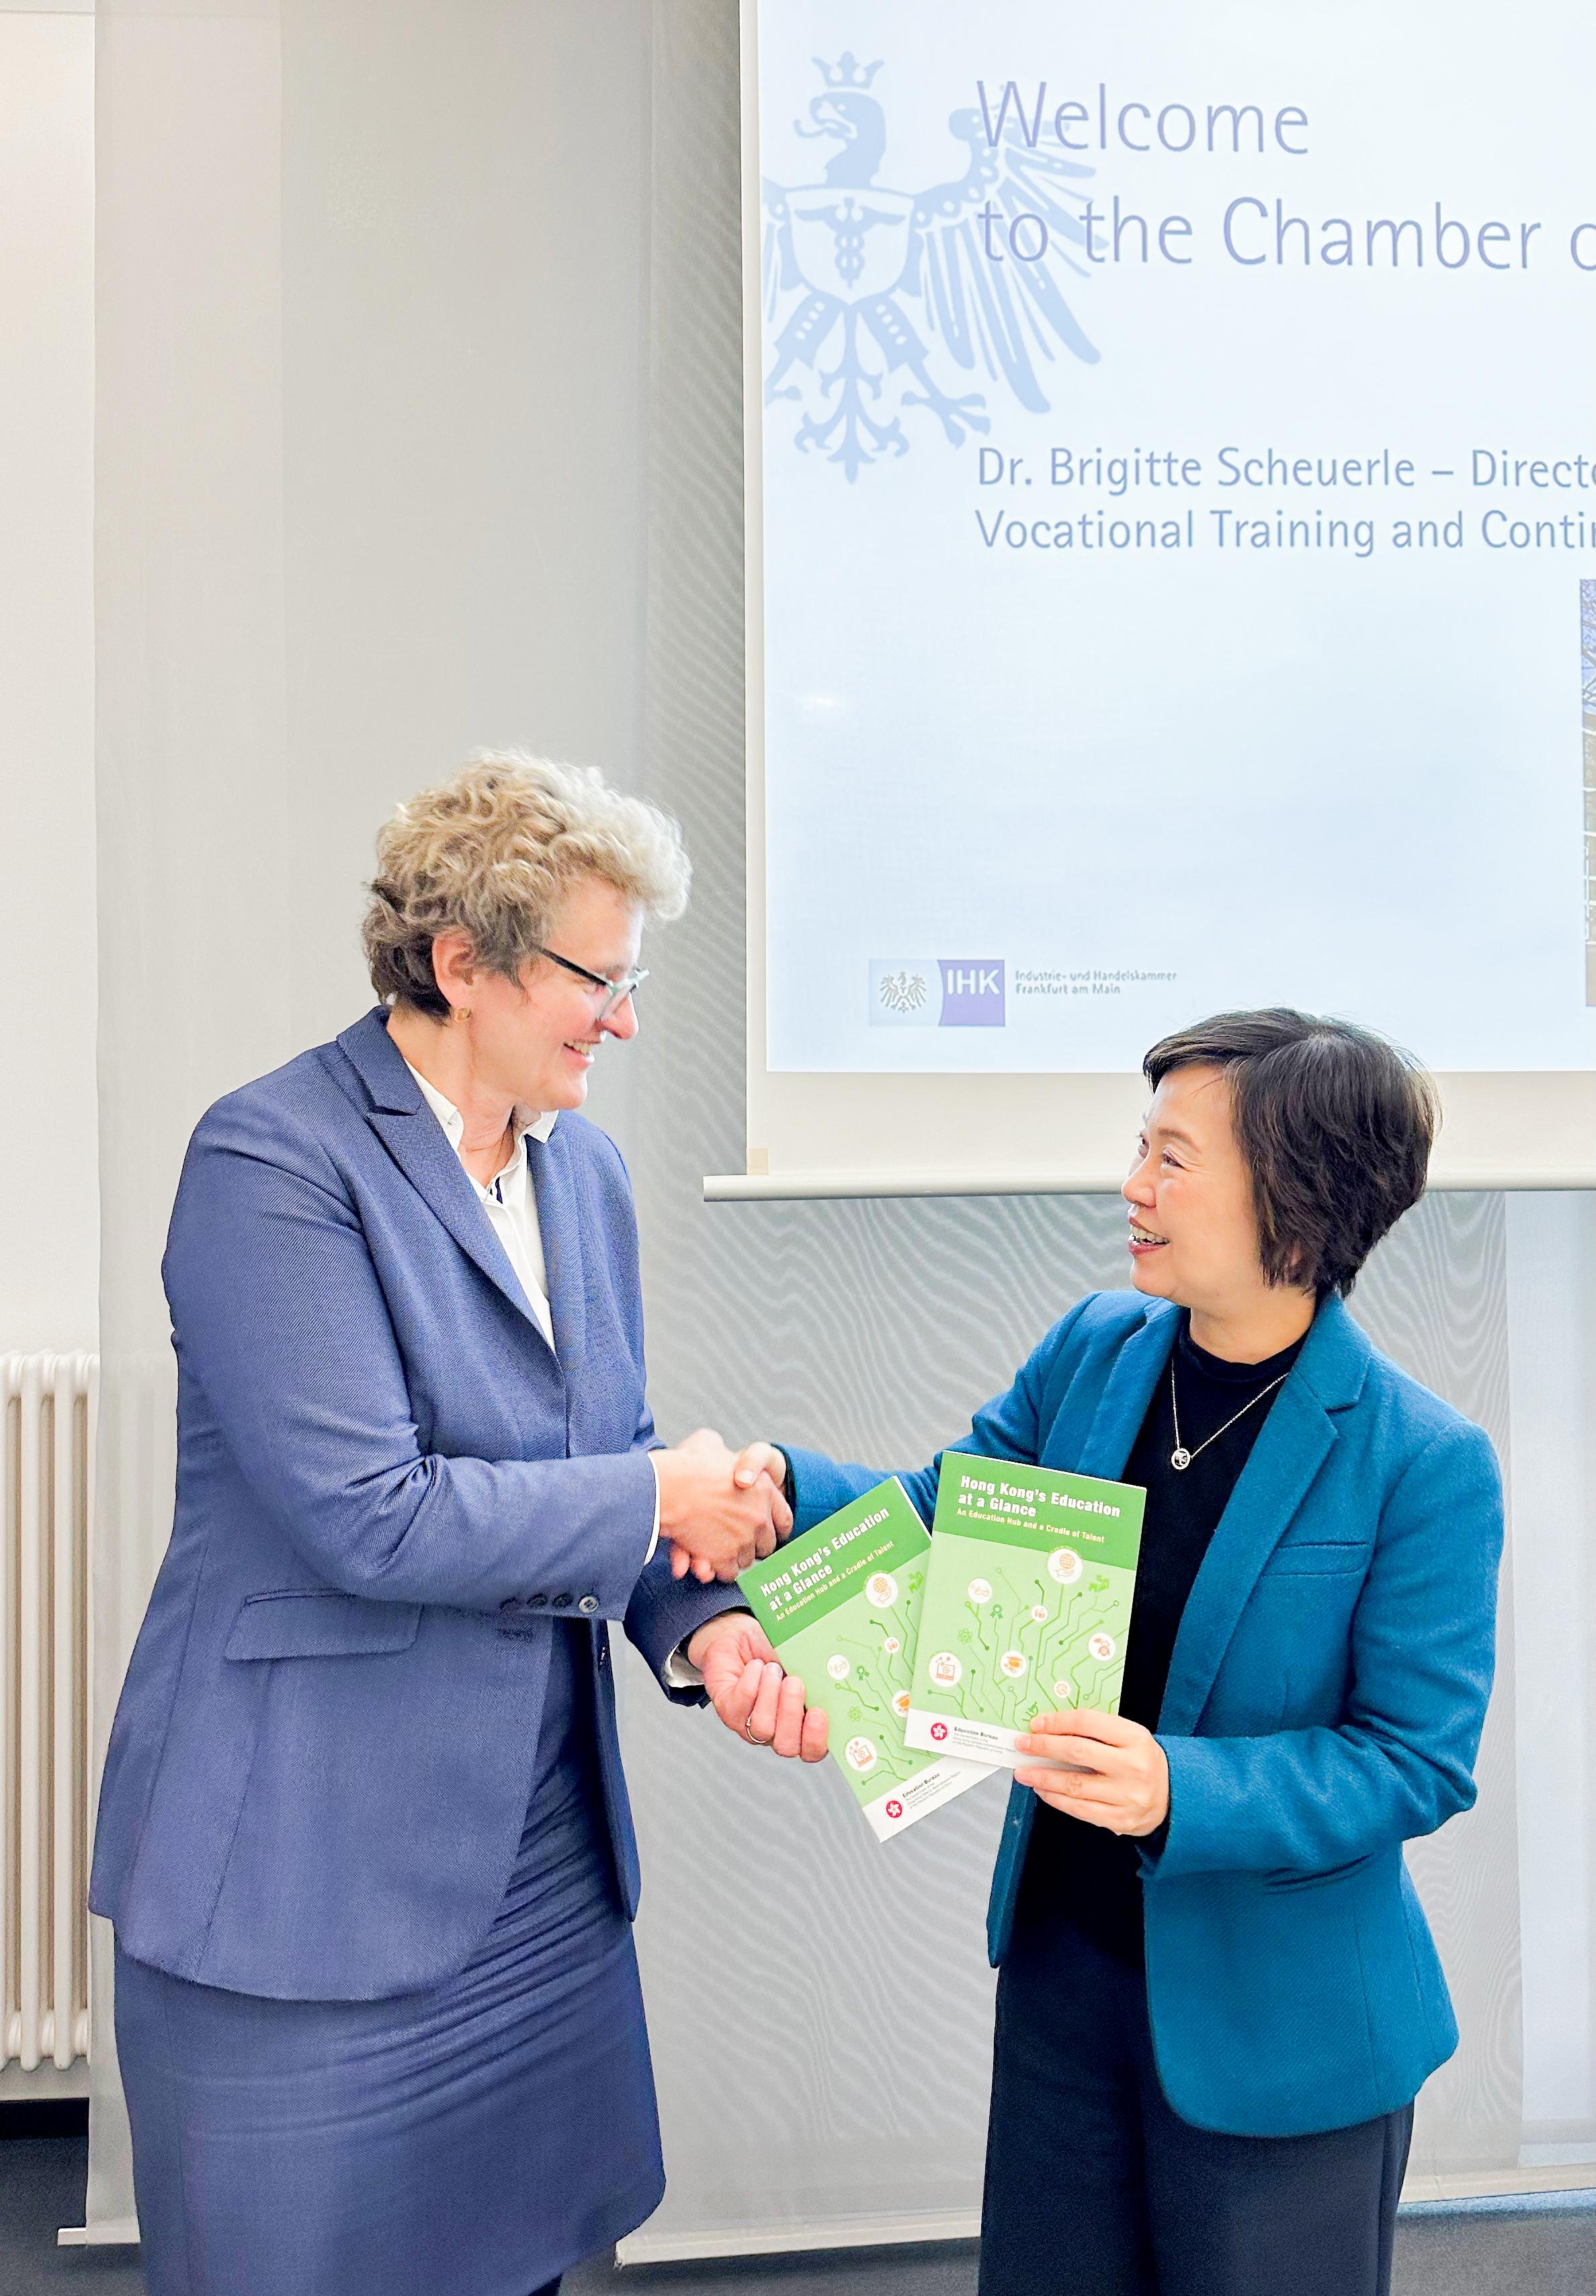 The Secretary for Education, Dr Choi Yuk-lin (right), meets the Managing Director, Training and Further Education, Vocational Training Committee of the Frankfurt am Main Chamber of Commerce and Industry, Dr Brigitte Scheuerle (left), in Frankfurt, Germany, on April 22 (Frankfurt time).